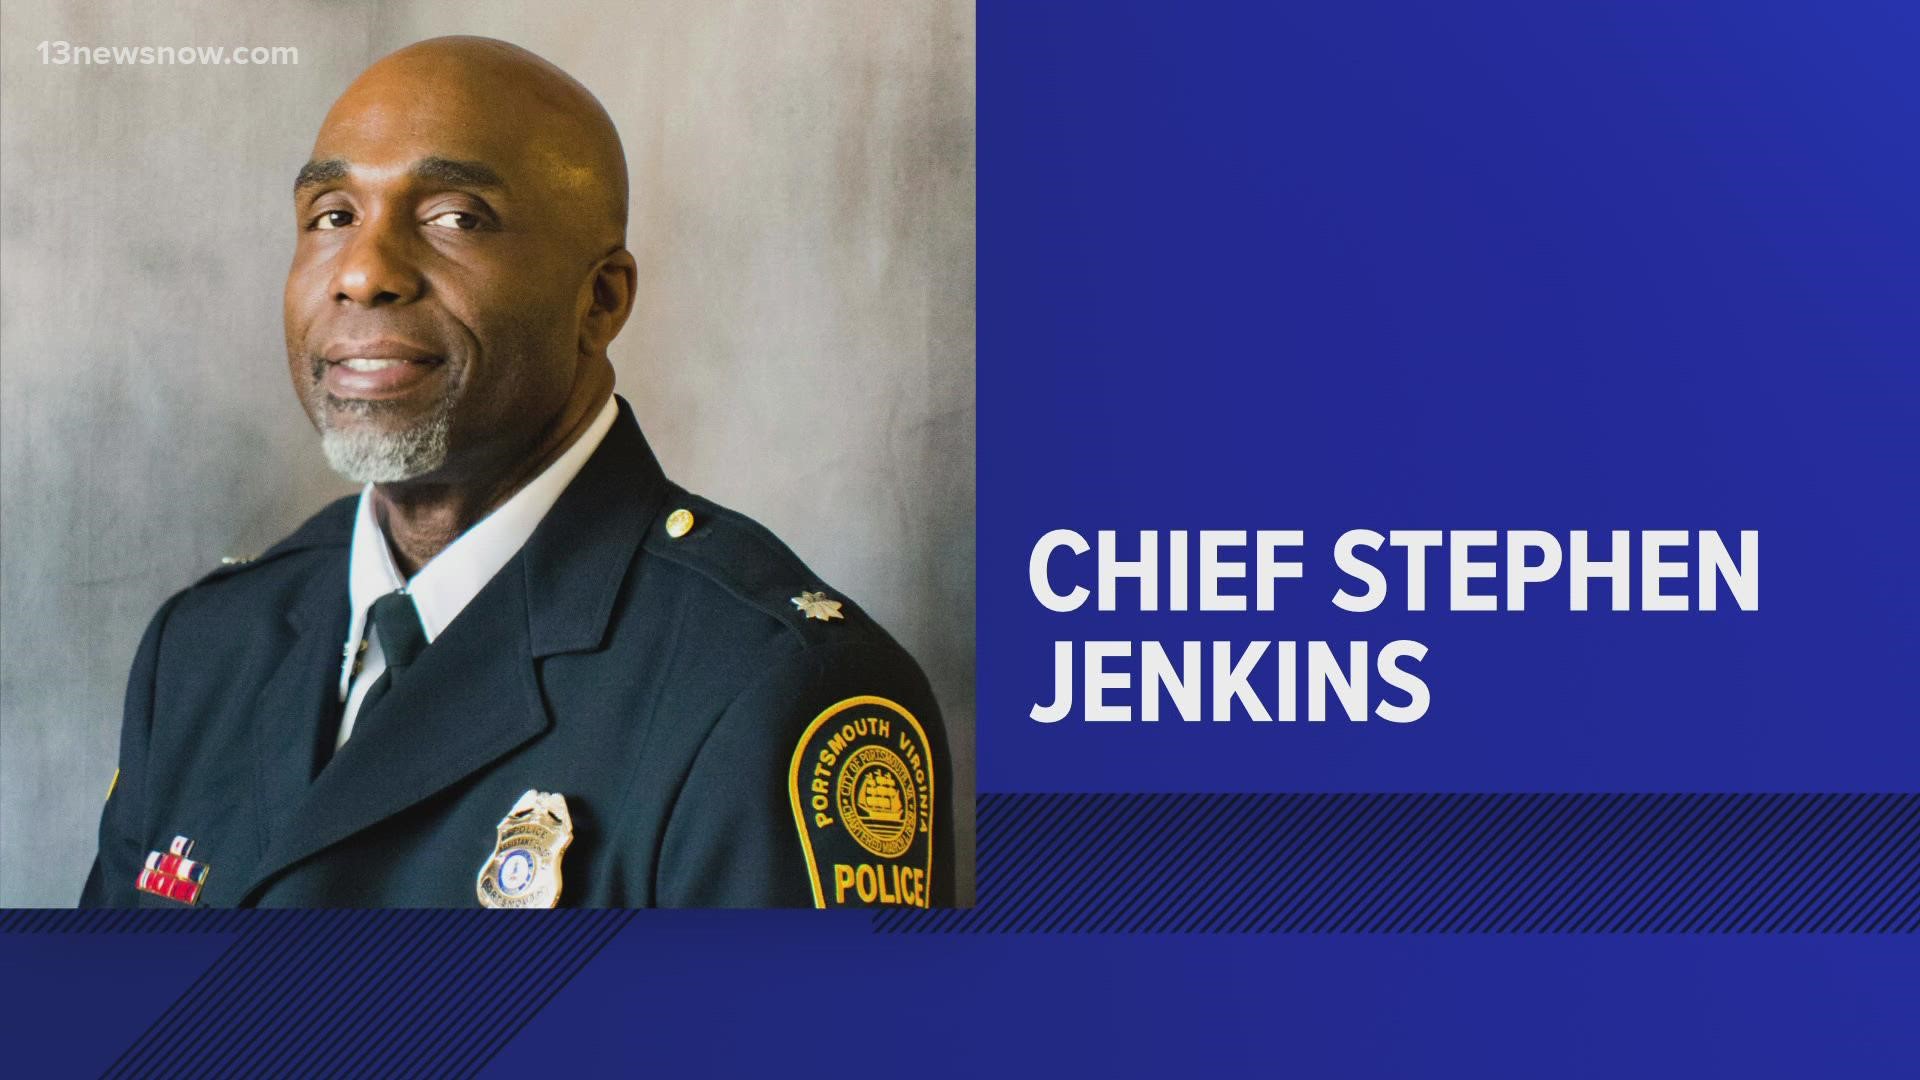 A 20-year veteran of the Portsmouth Police Department, Stephen Jenkins rose through the ranks.